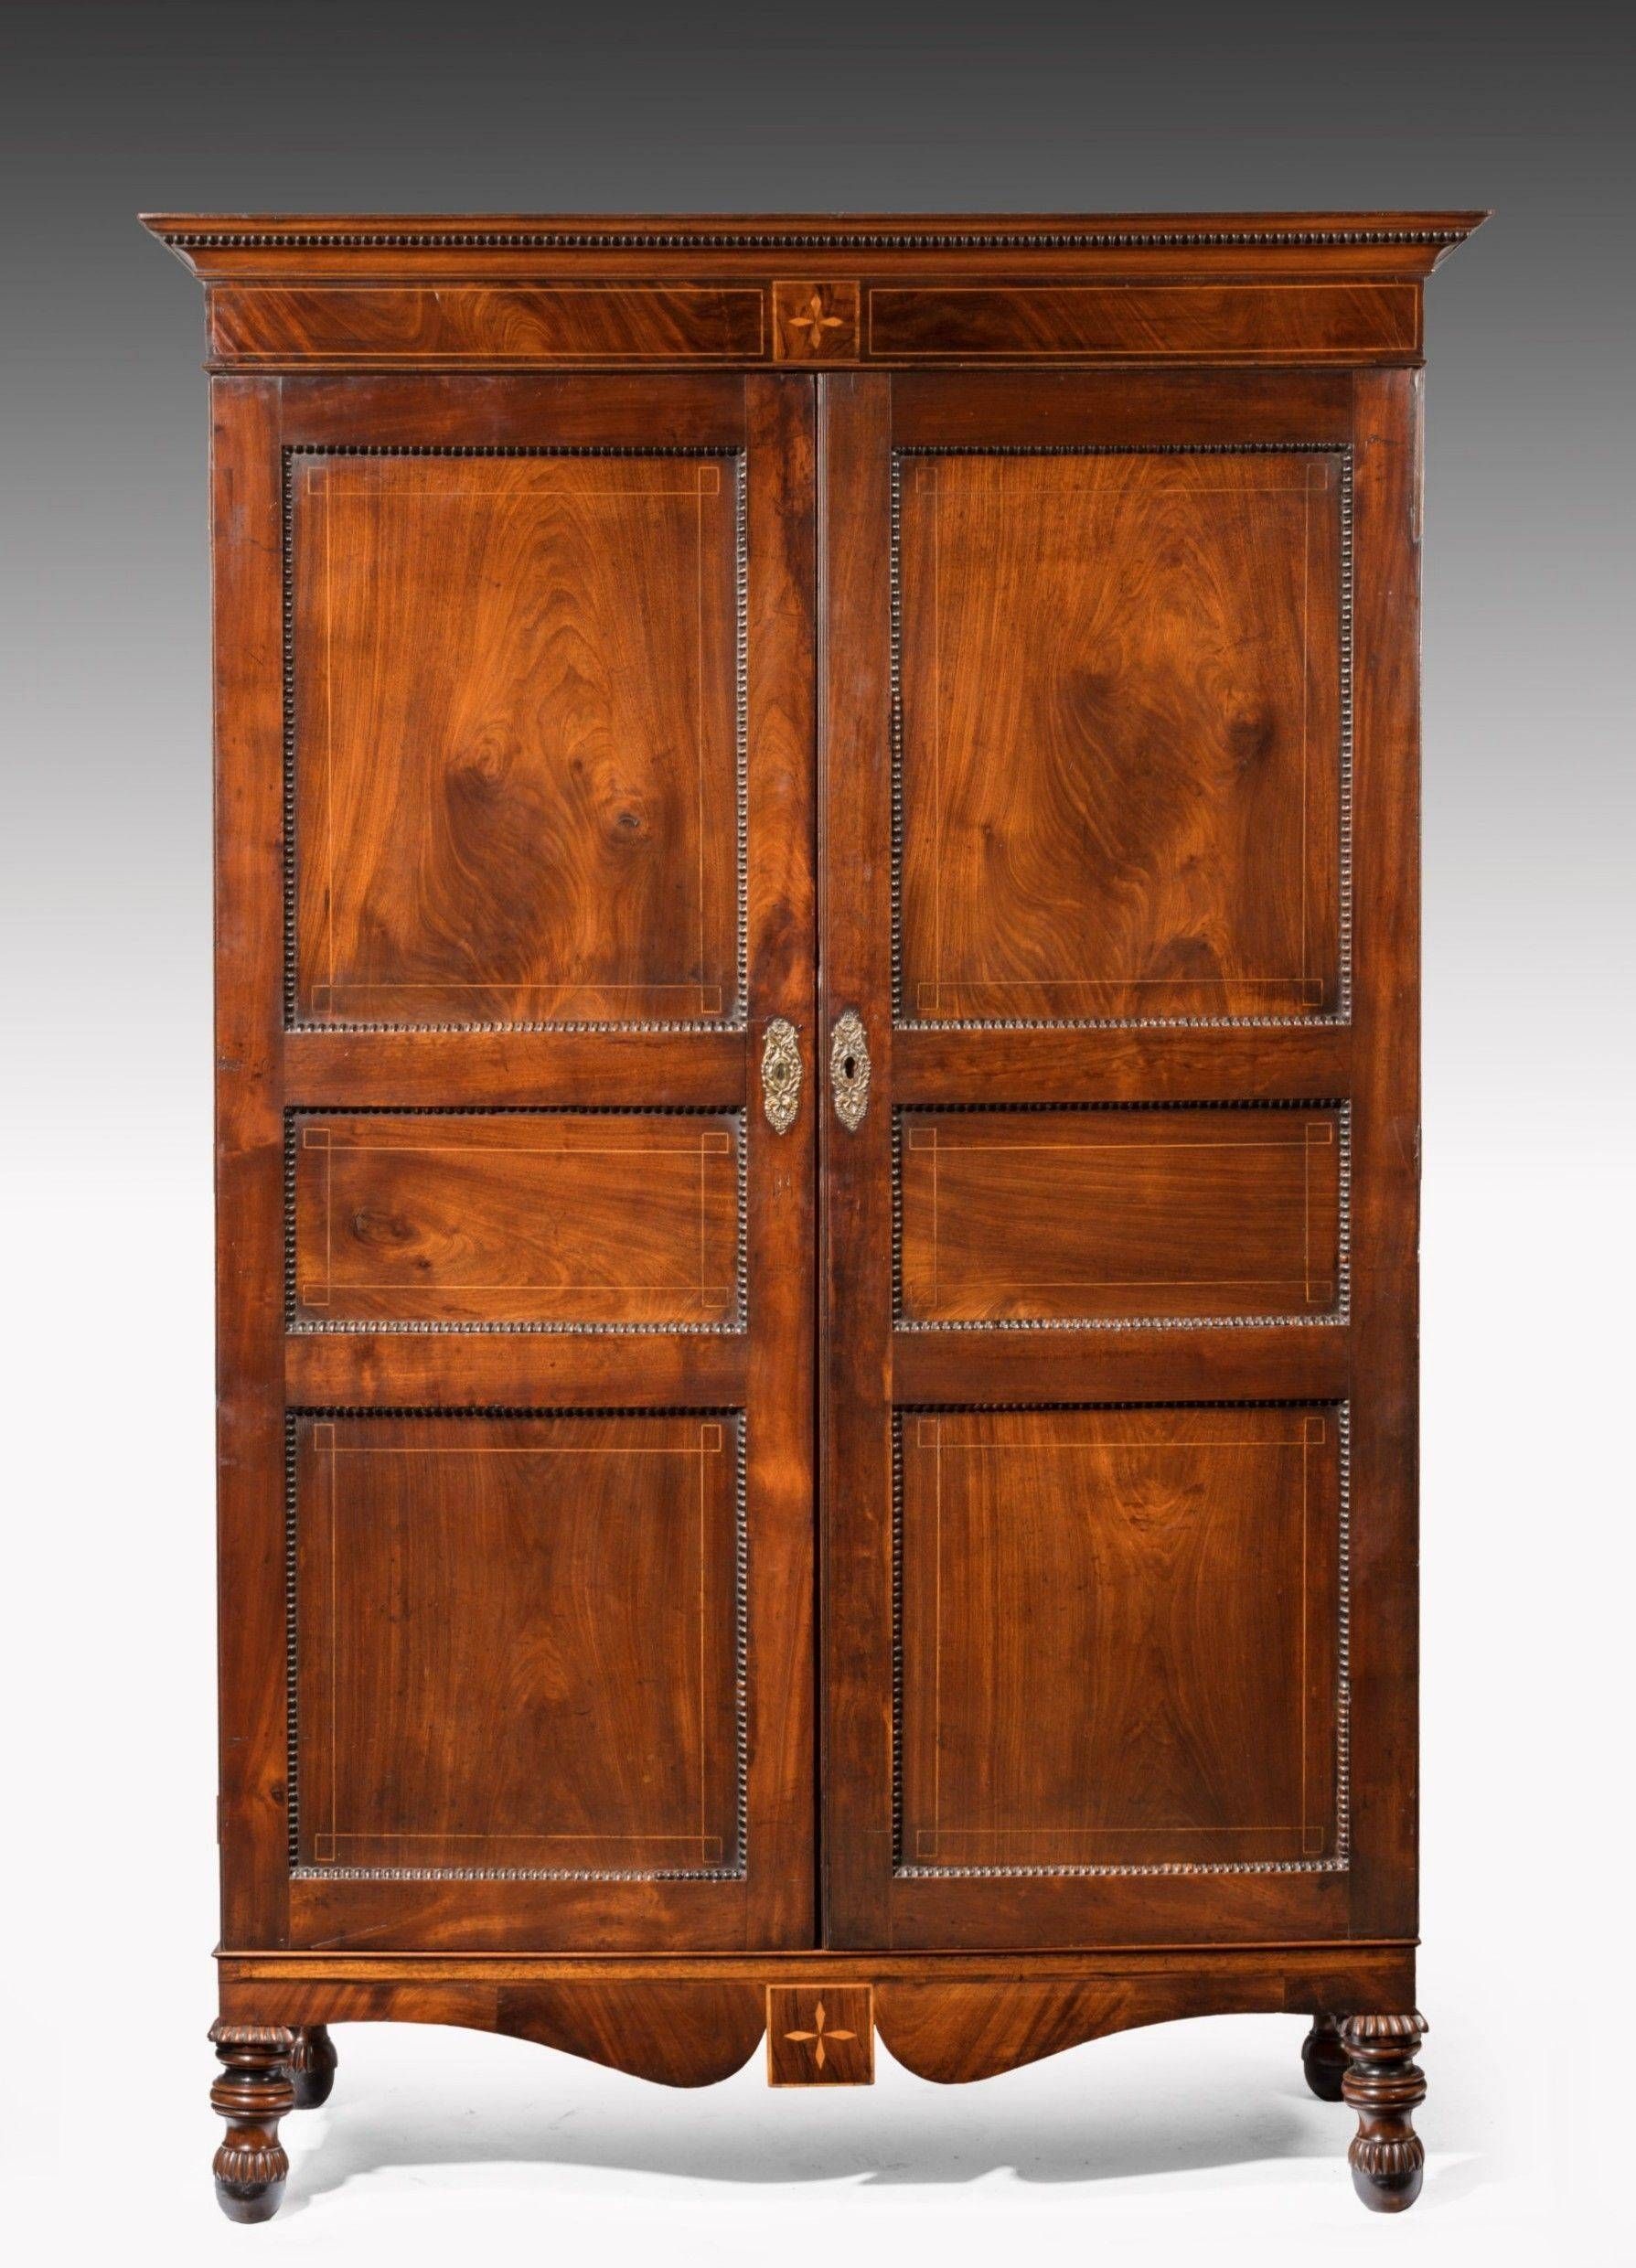 Antique Mahogany Wardrobes – The Uk's Premier Antiques Portal With Regard To Antique Wardrobes (View 12 of 15)